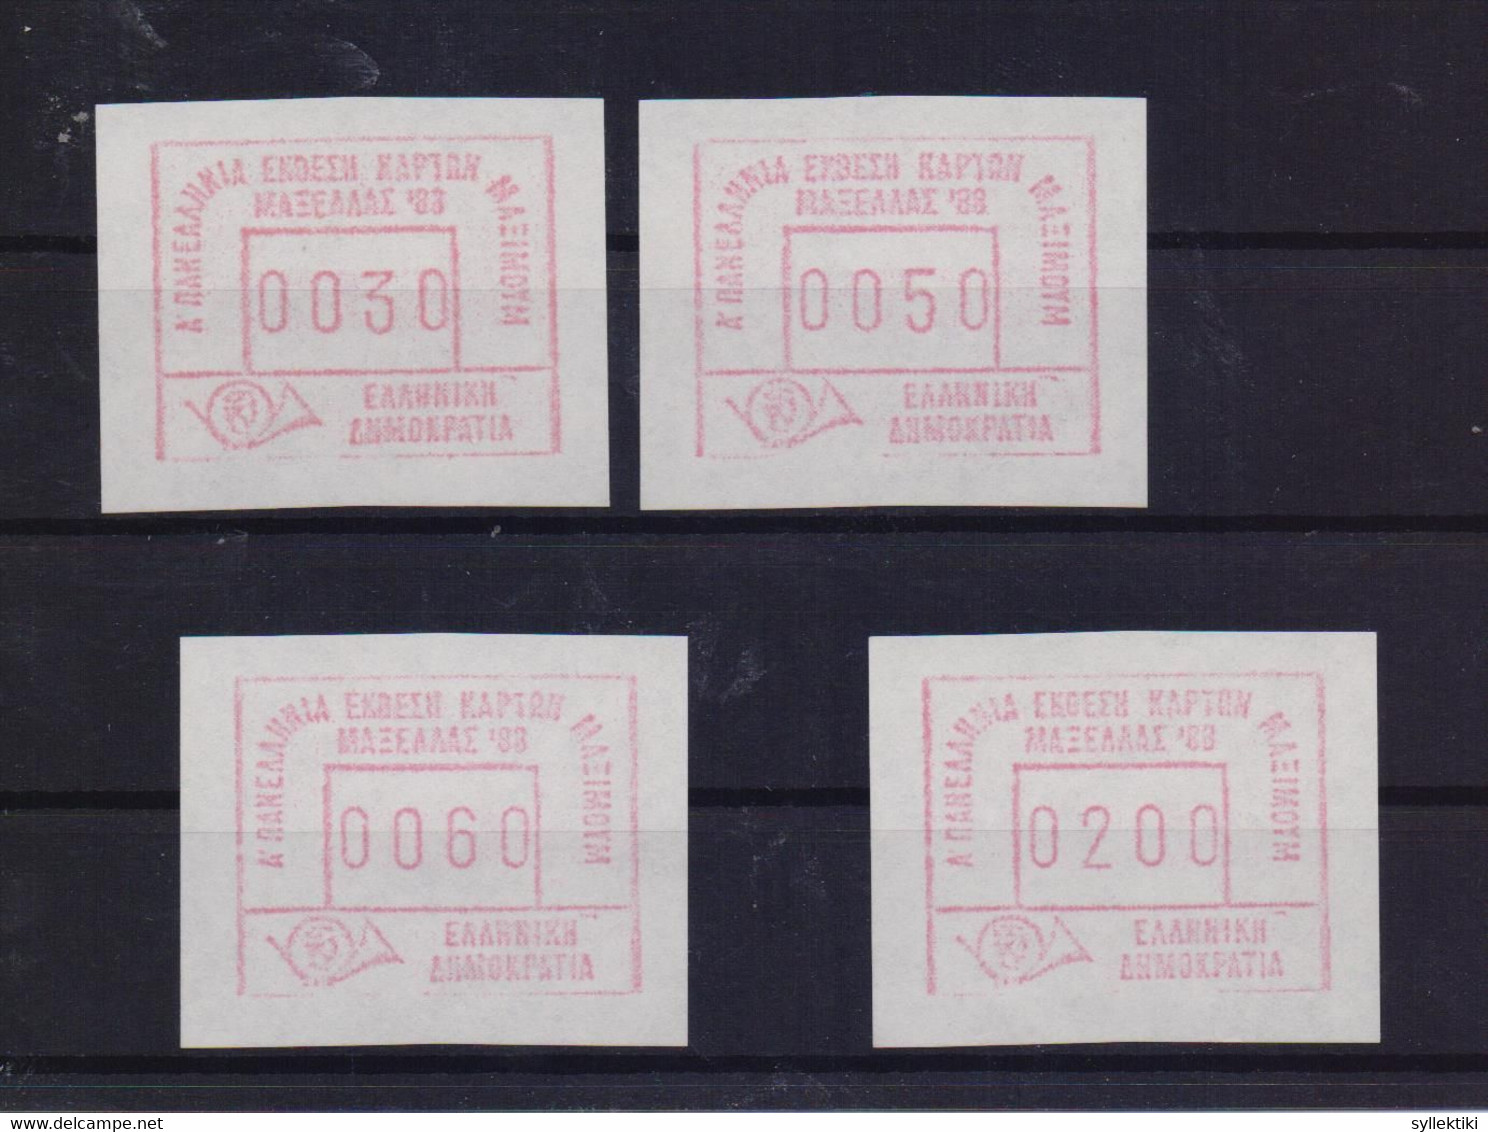 GREECE 1988 ATM FRAMA ΕΧΗΙΒΙΤΙΟΝ MAXELLAS'88 TYPE I COMPLETE SET OF 4 MNH STAMPS - Automatenmarken [ATM]